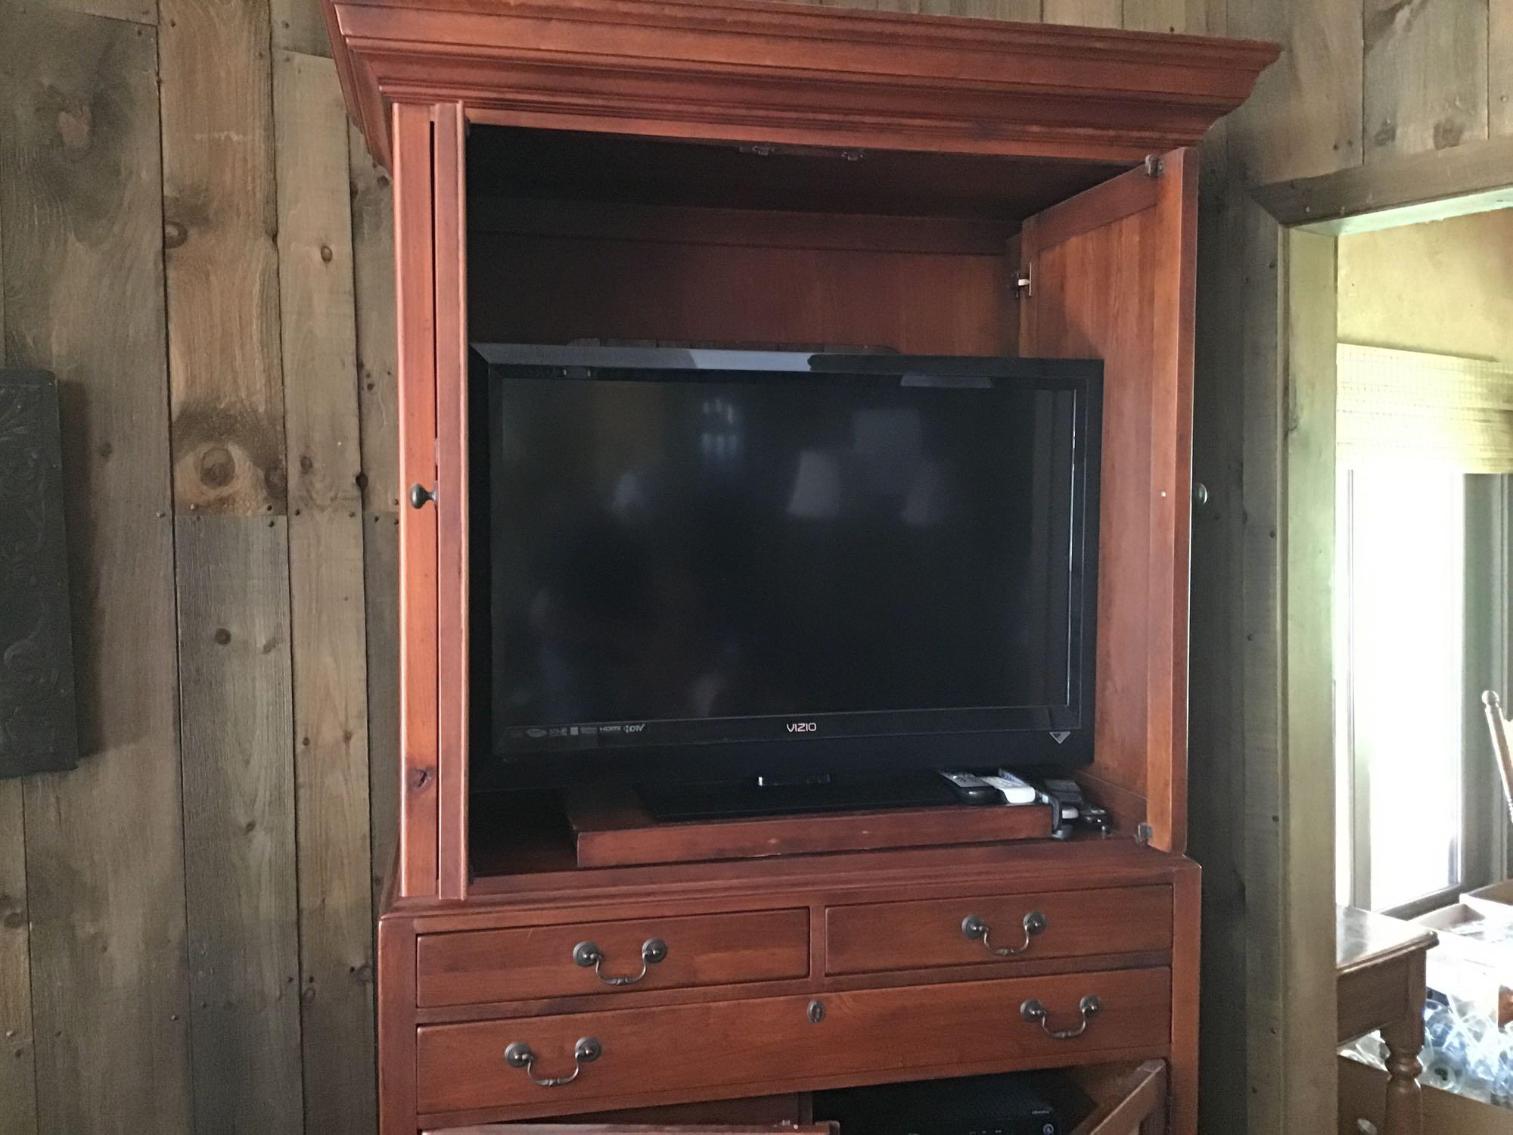 Image for Visio Flat Screen TV in Cherry Cabinet